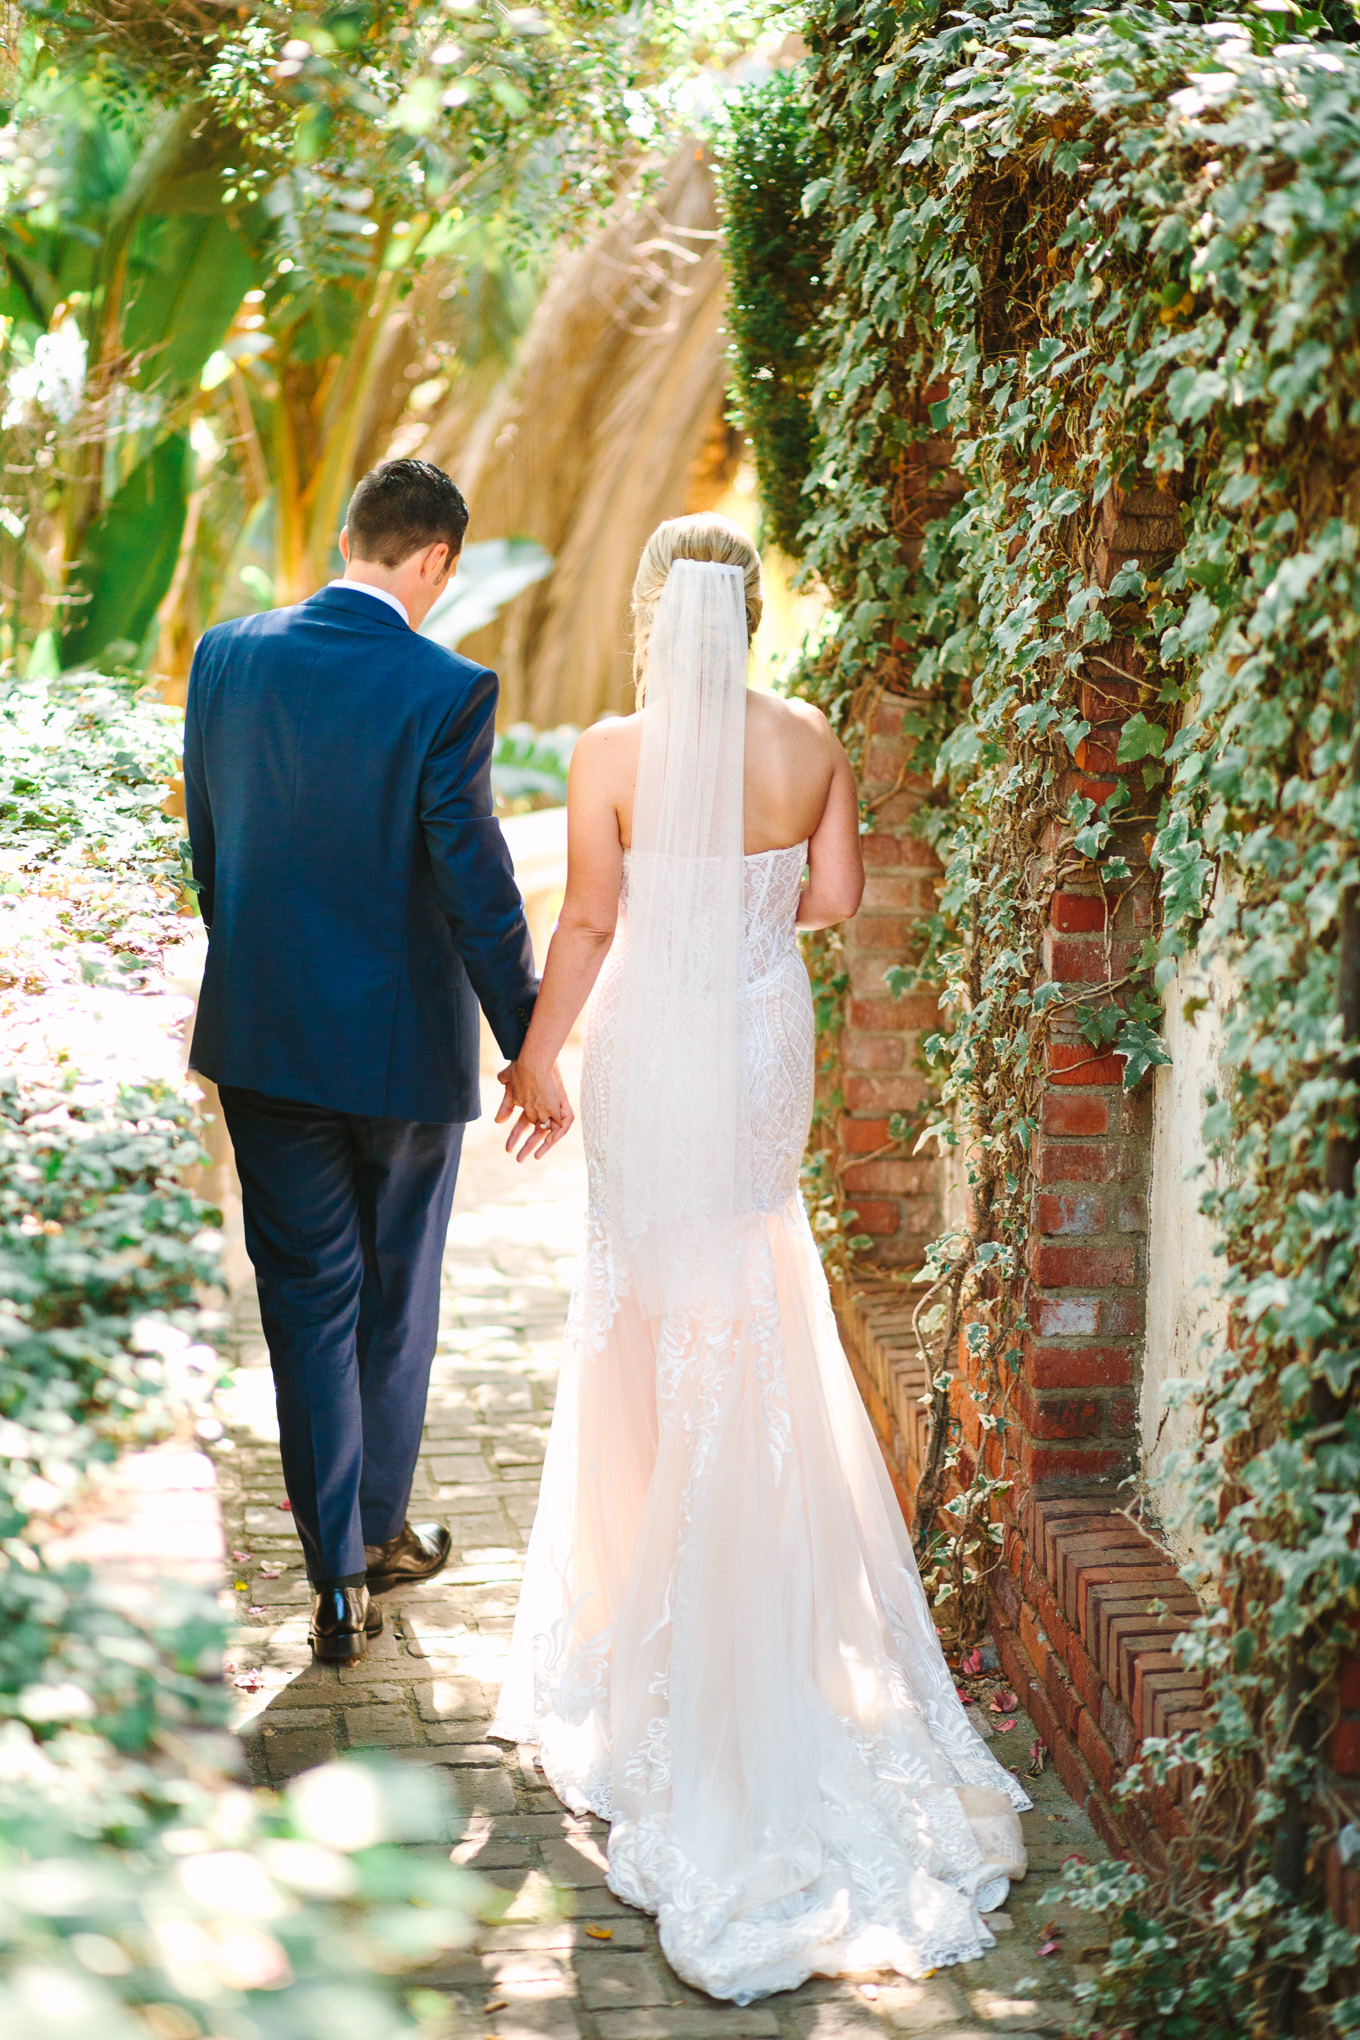 Bride and groom walking in secret garden at Houdini Estate wedding | Best Southern California Garden Wedding Venues | Colorful and elevated wedding photography for fun-loving couples | #gardenvenue #weddingvenue #socalweddingvenue #bouquetideas #uniquebouquet   Source: Mary Costa Photography | Los Angeles 